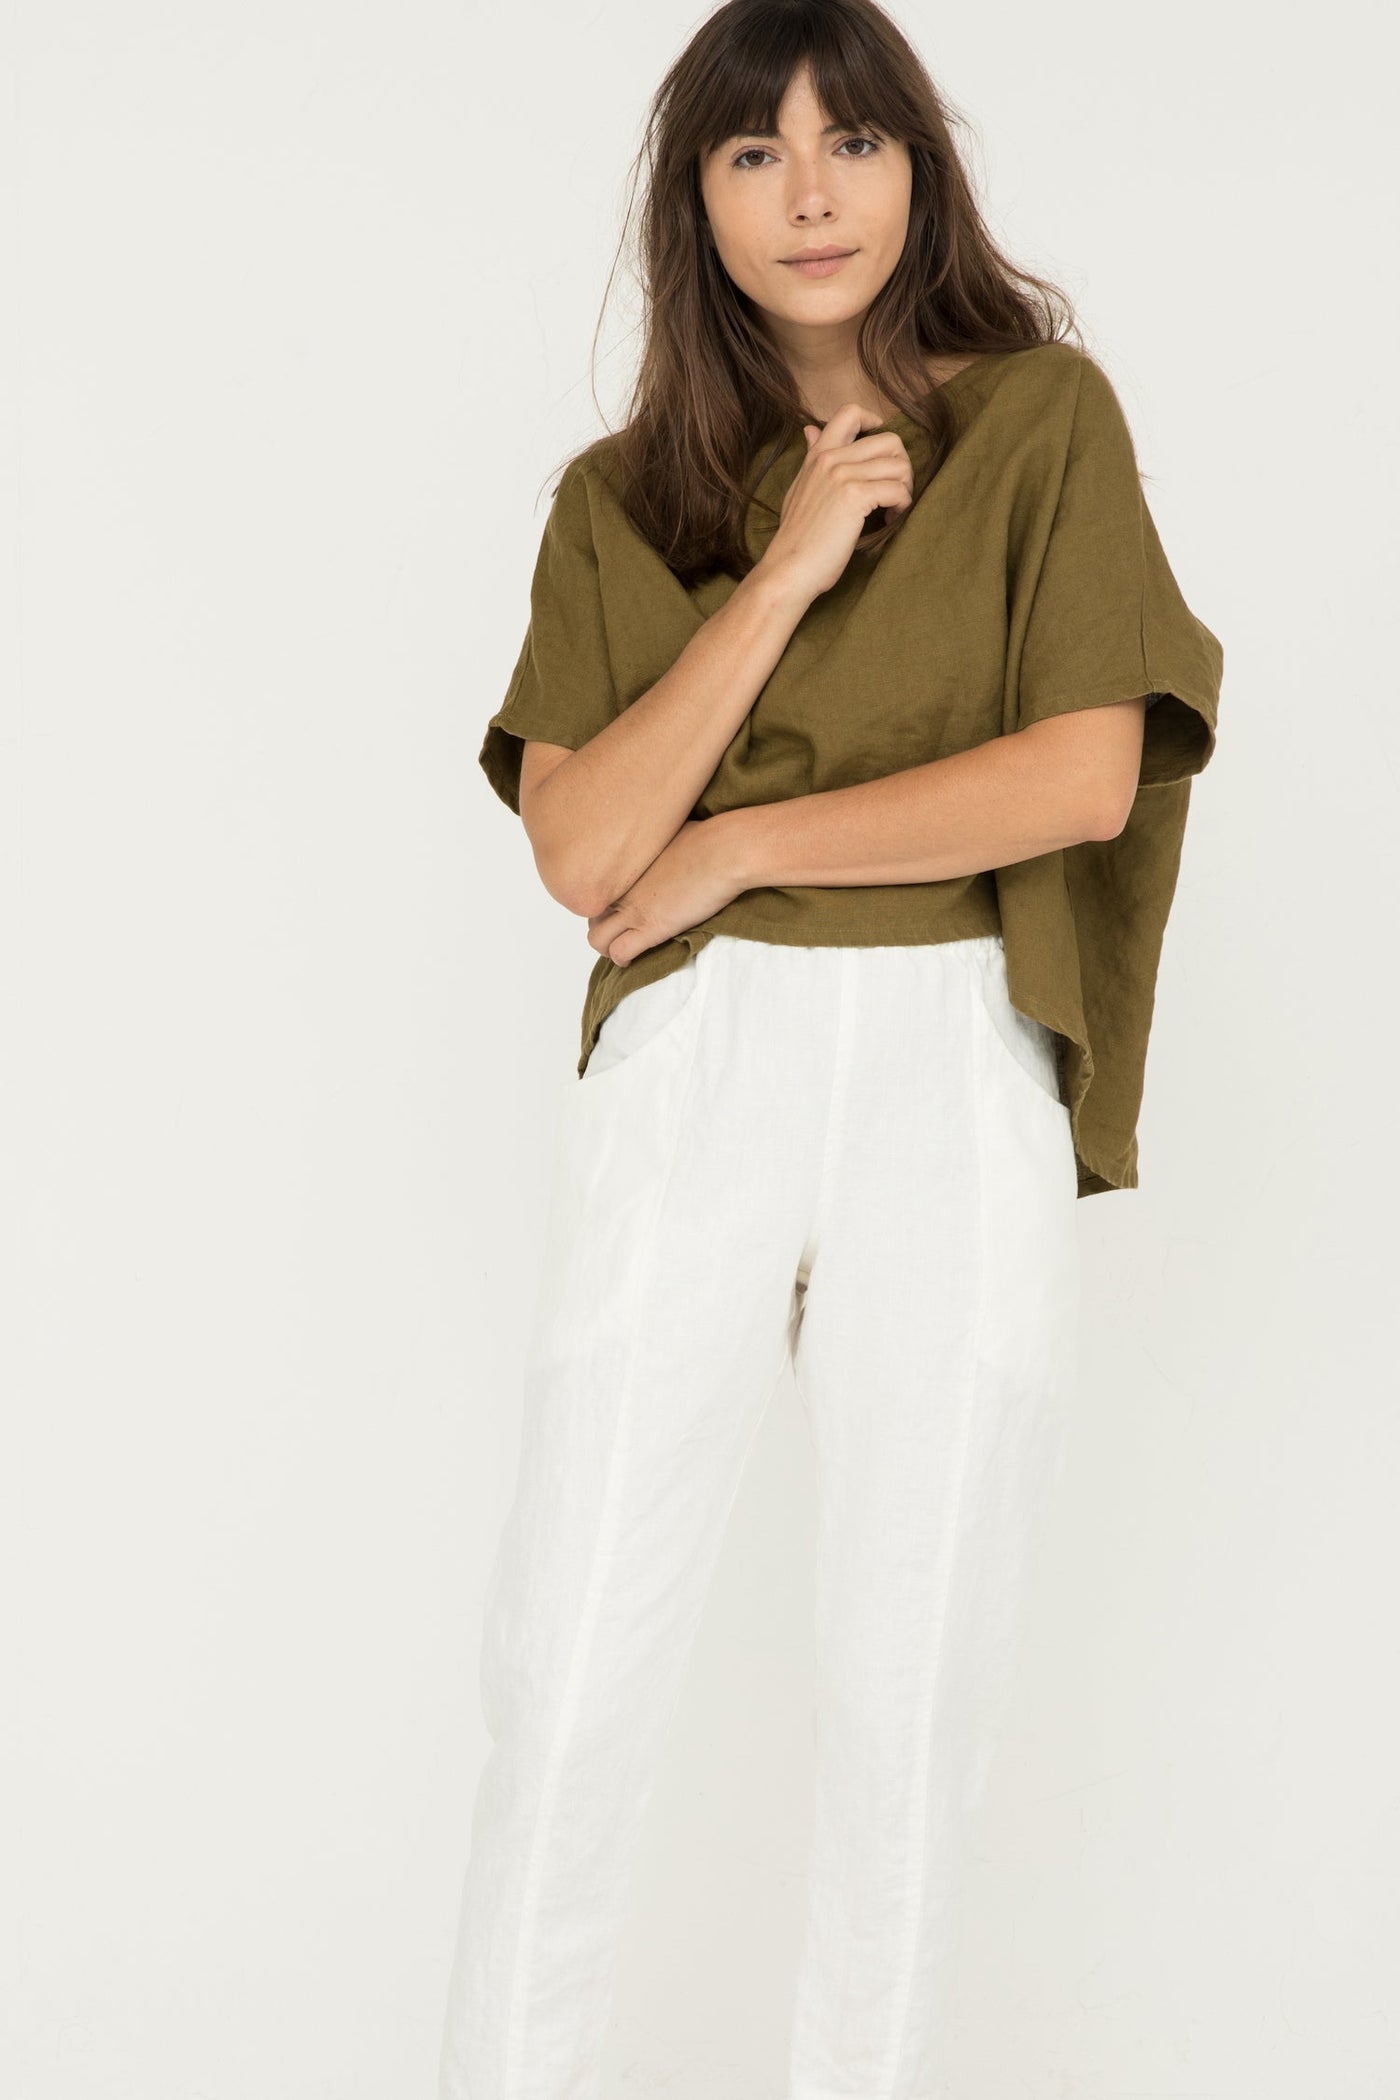 Clyde Work Pant in Midweight Linen Ivory#color_ivory